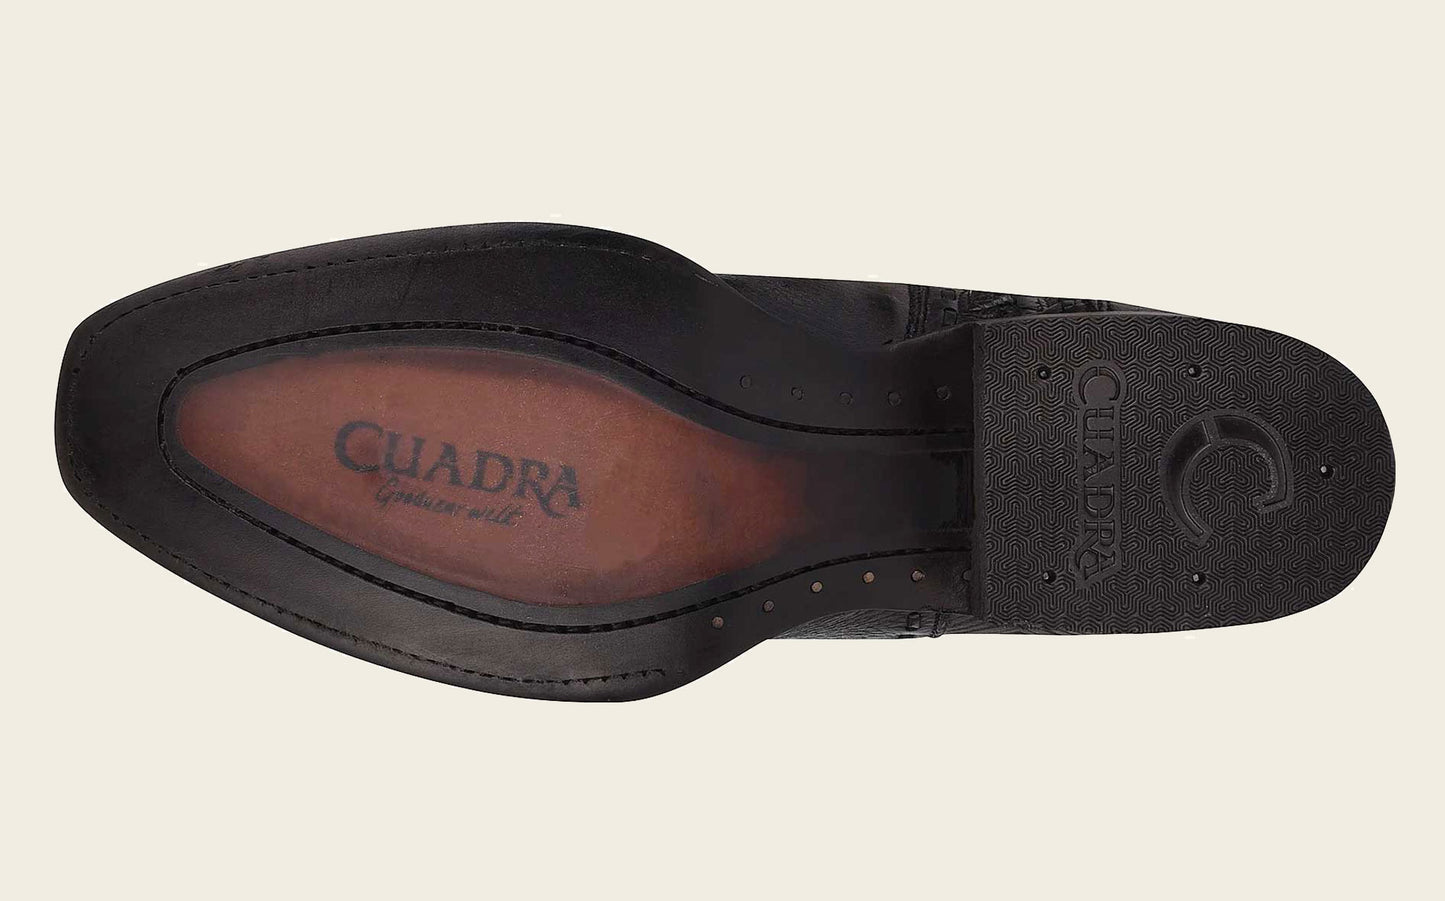 TPU-enhanced leather soles: Confidence in each step with superior traction.